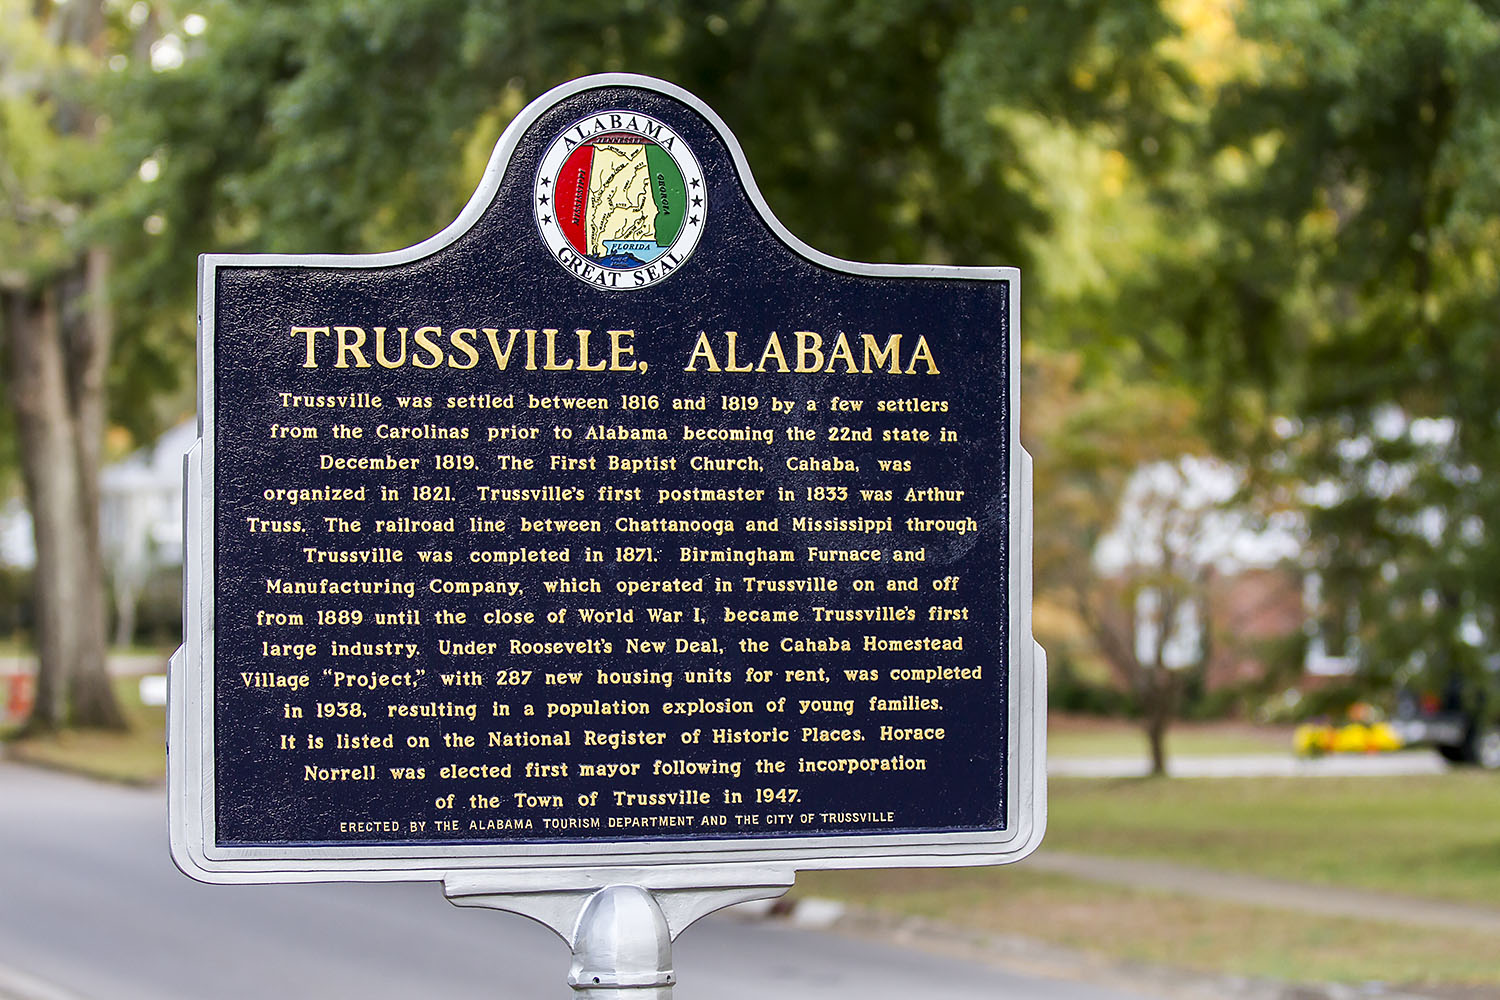 Trussville ranked No. 15 for best place in Alabama to raise a family